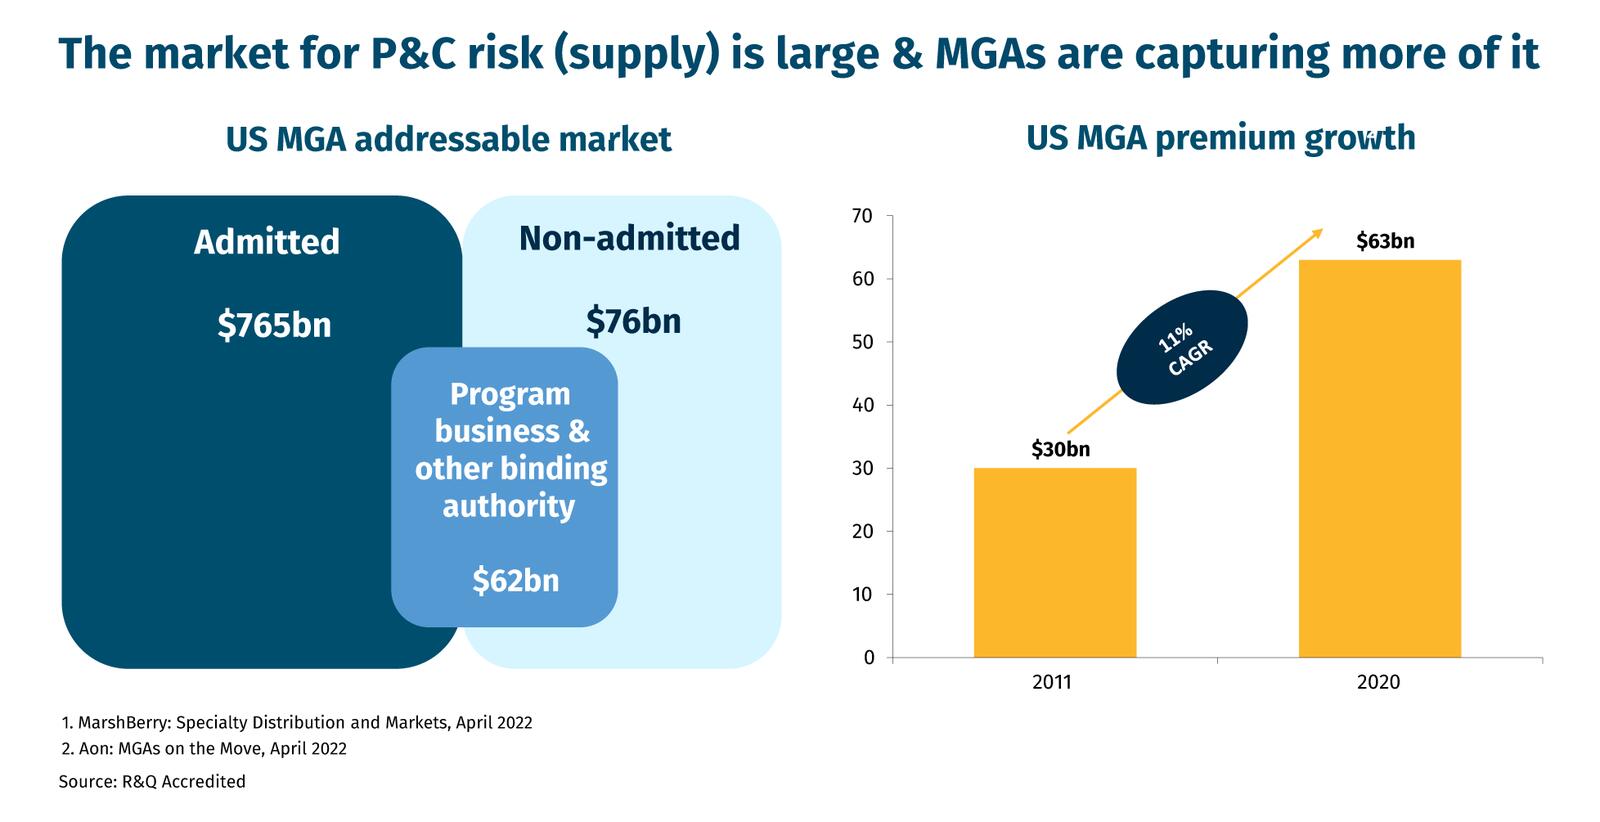 The market for P&C risk (supply) is large & MGAs are capturing more of it